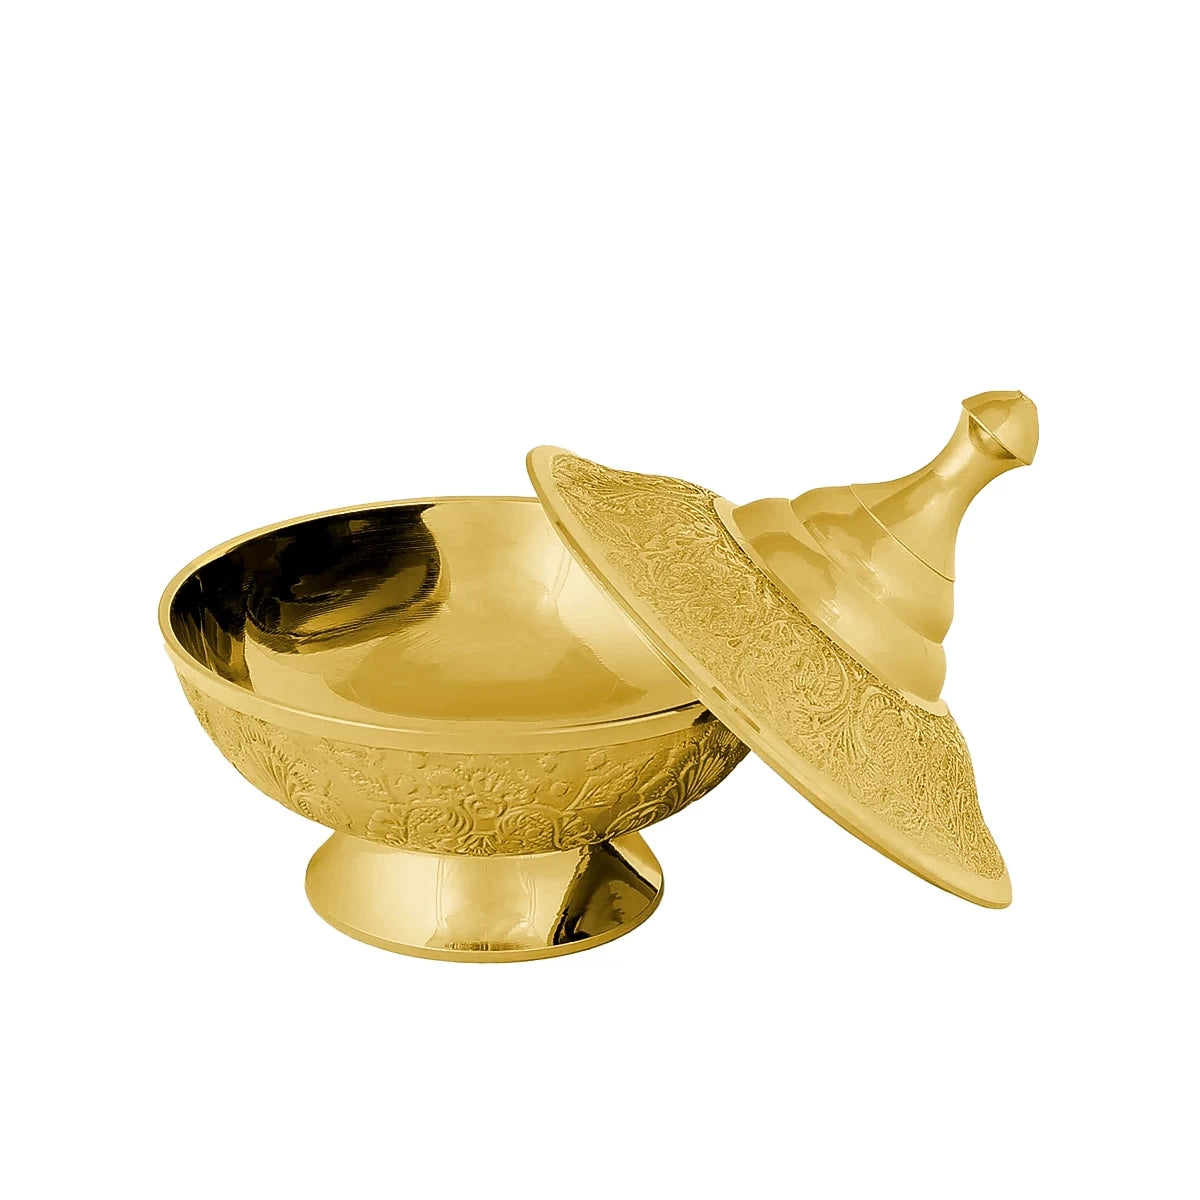 Flat View of Gold Colred Floral Decor Brass Metal Bowl with Open Lids